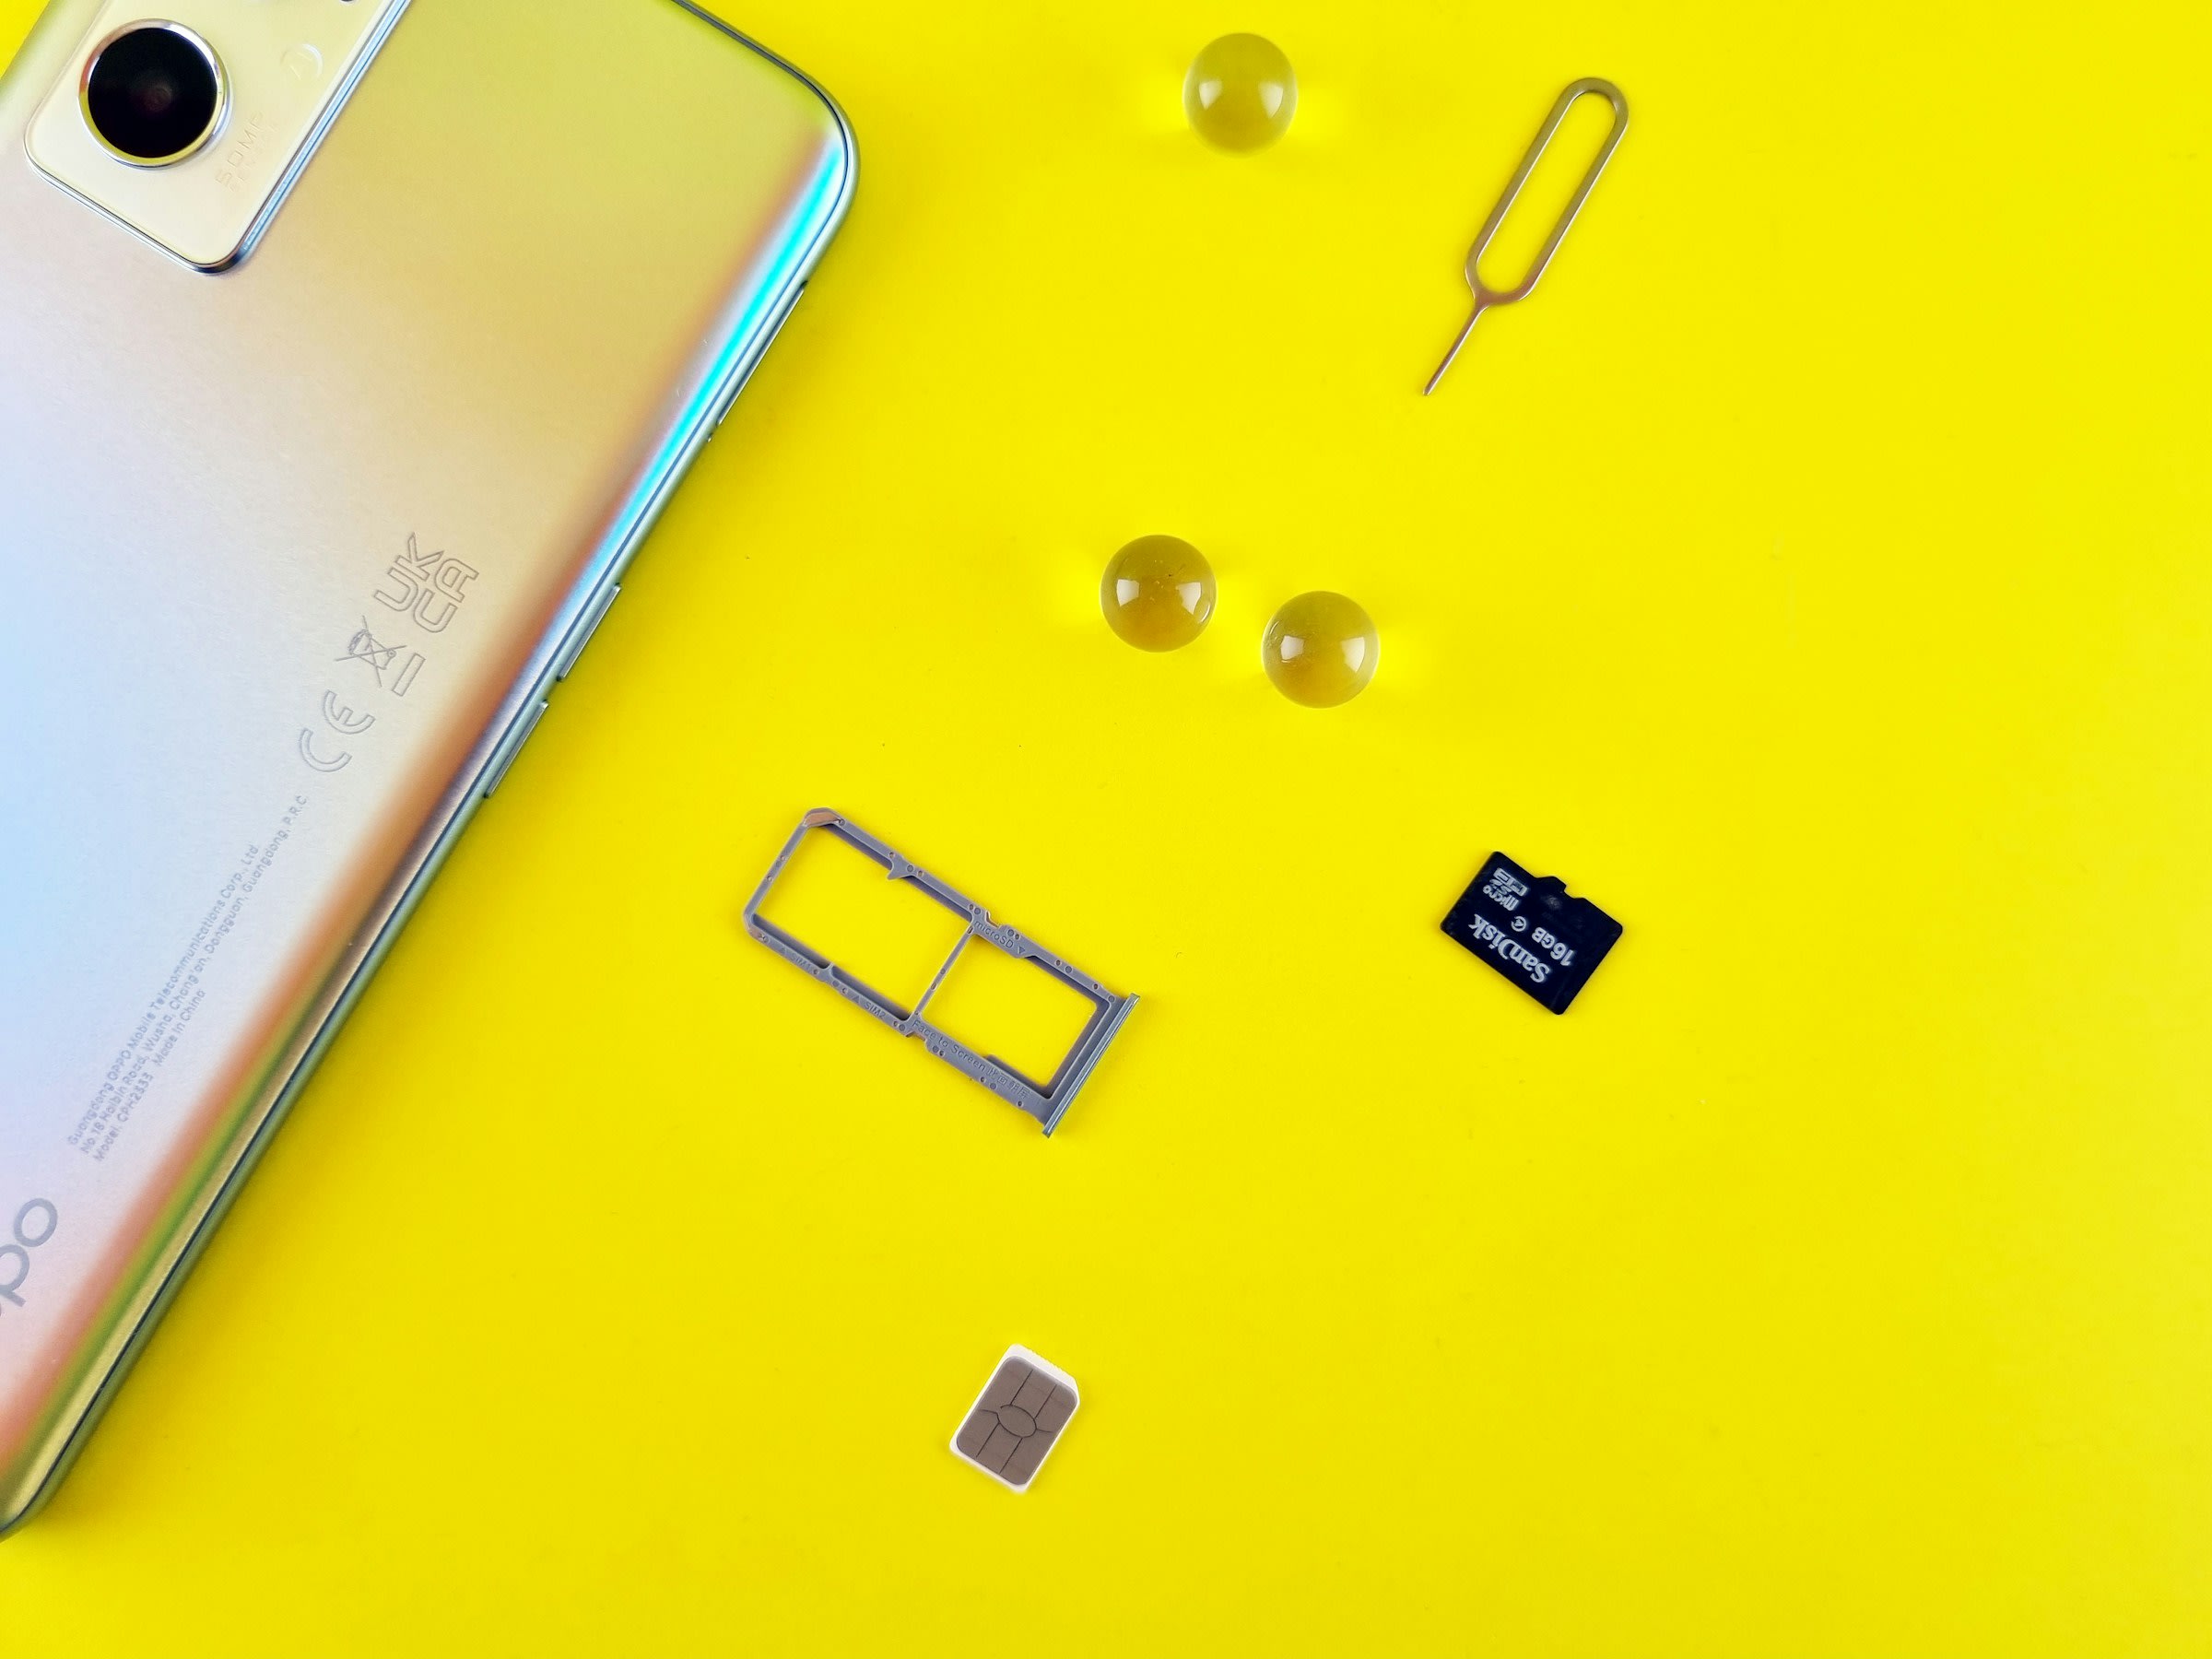 A smartphone with its SIM card tray open, the SIM card laid out on a yellow surface.